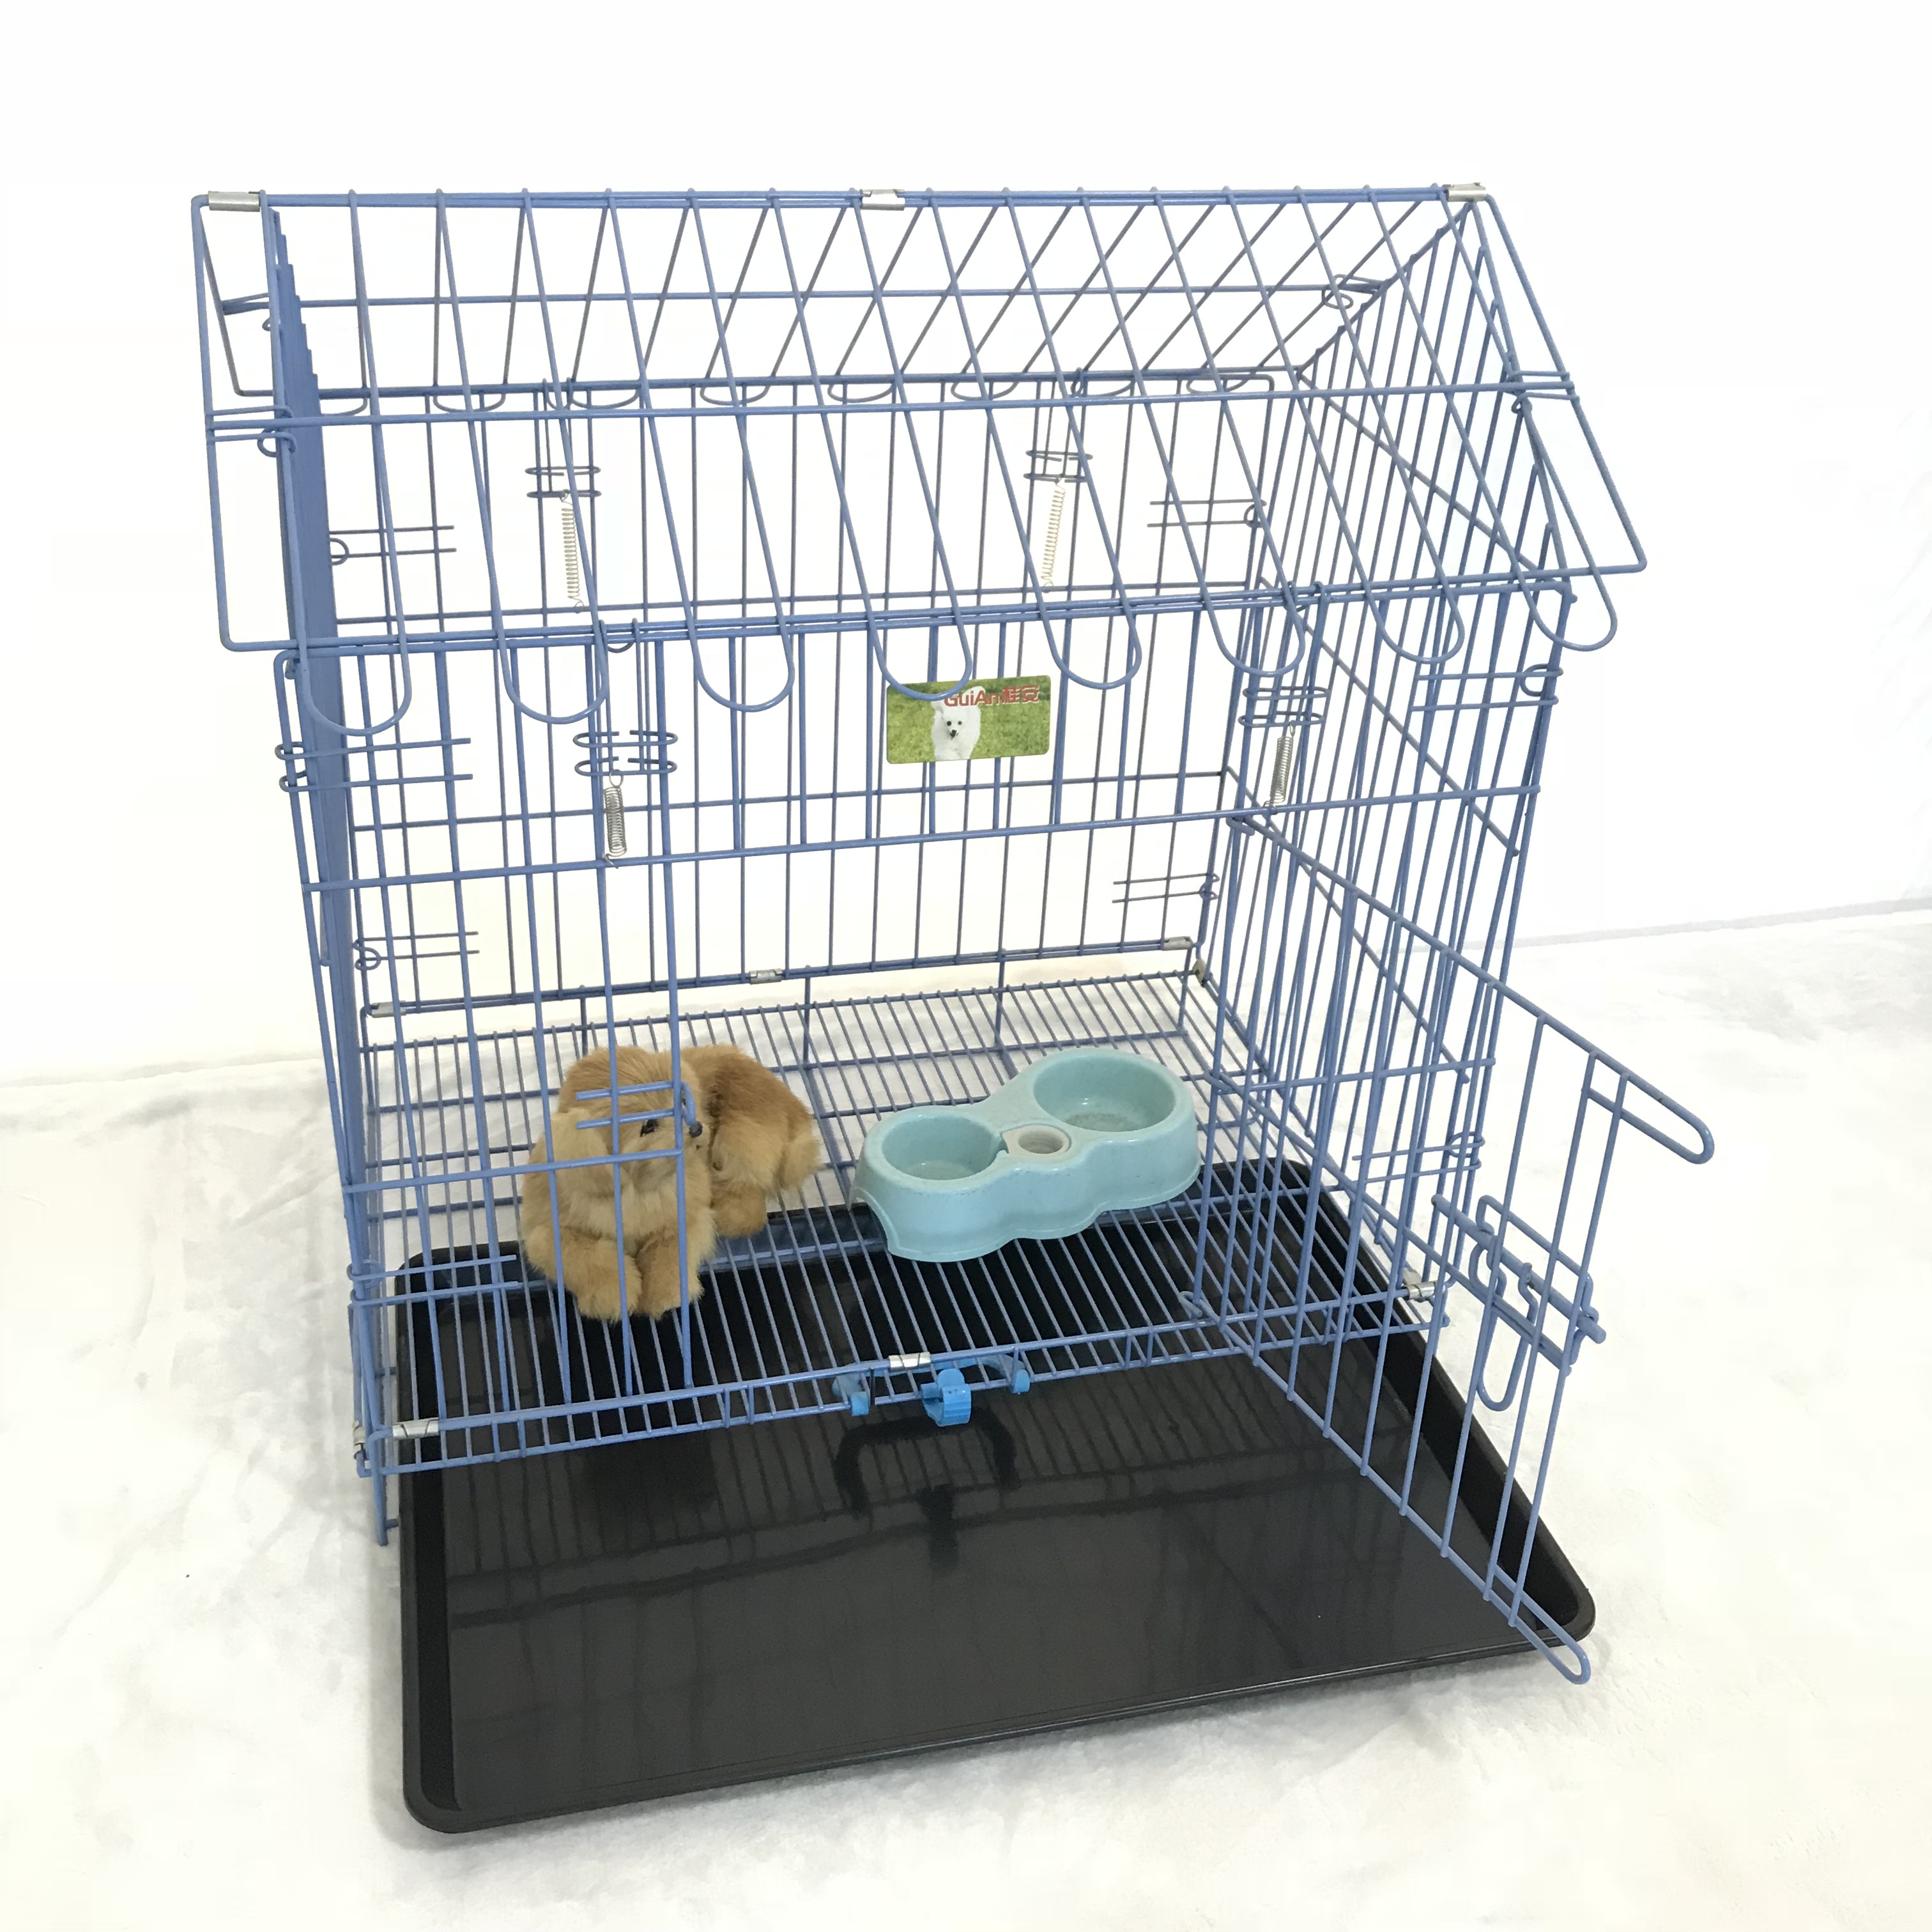 Great designed high quality durable Foldable Metal Pet dog Exercise and Playpen cage crate